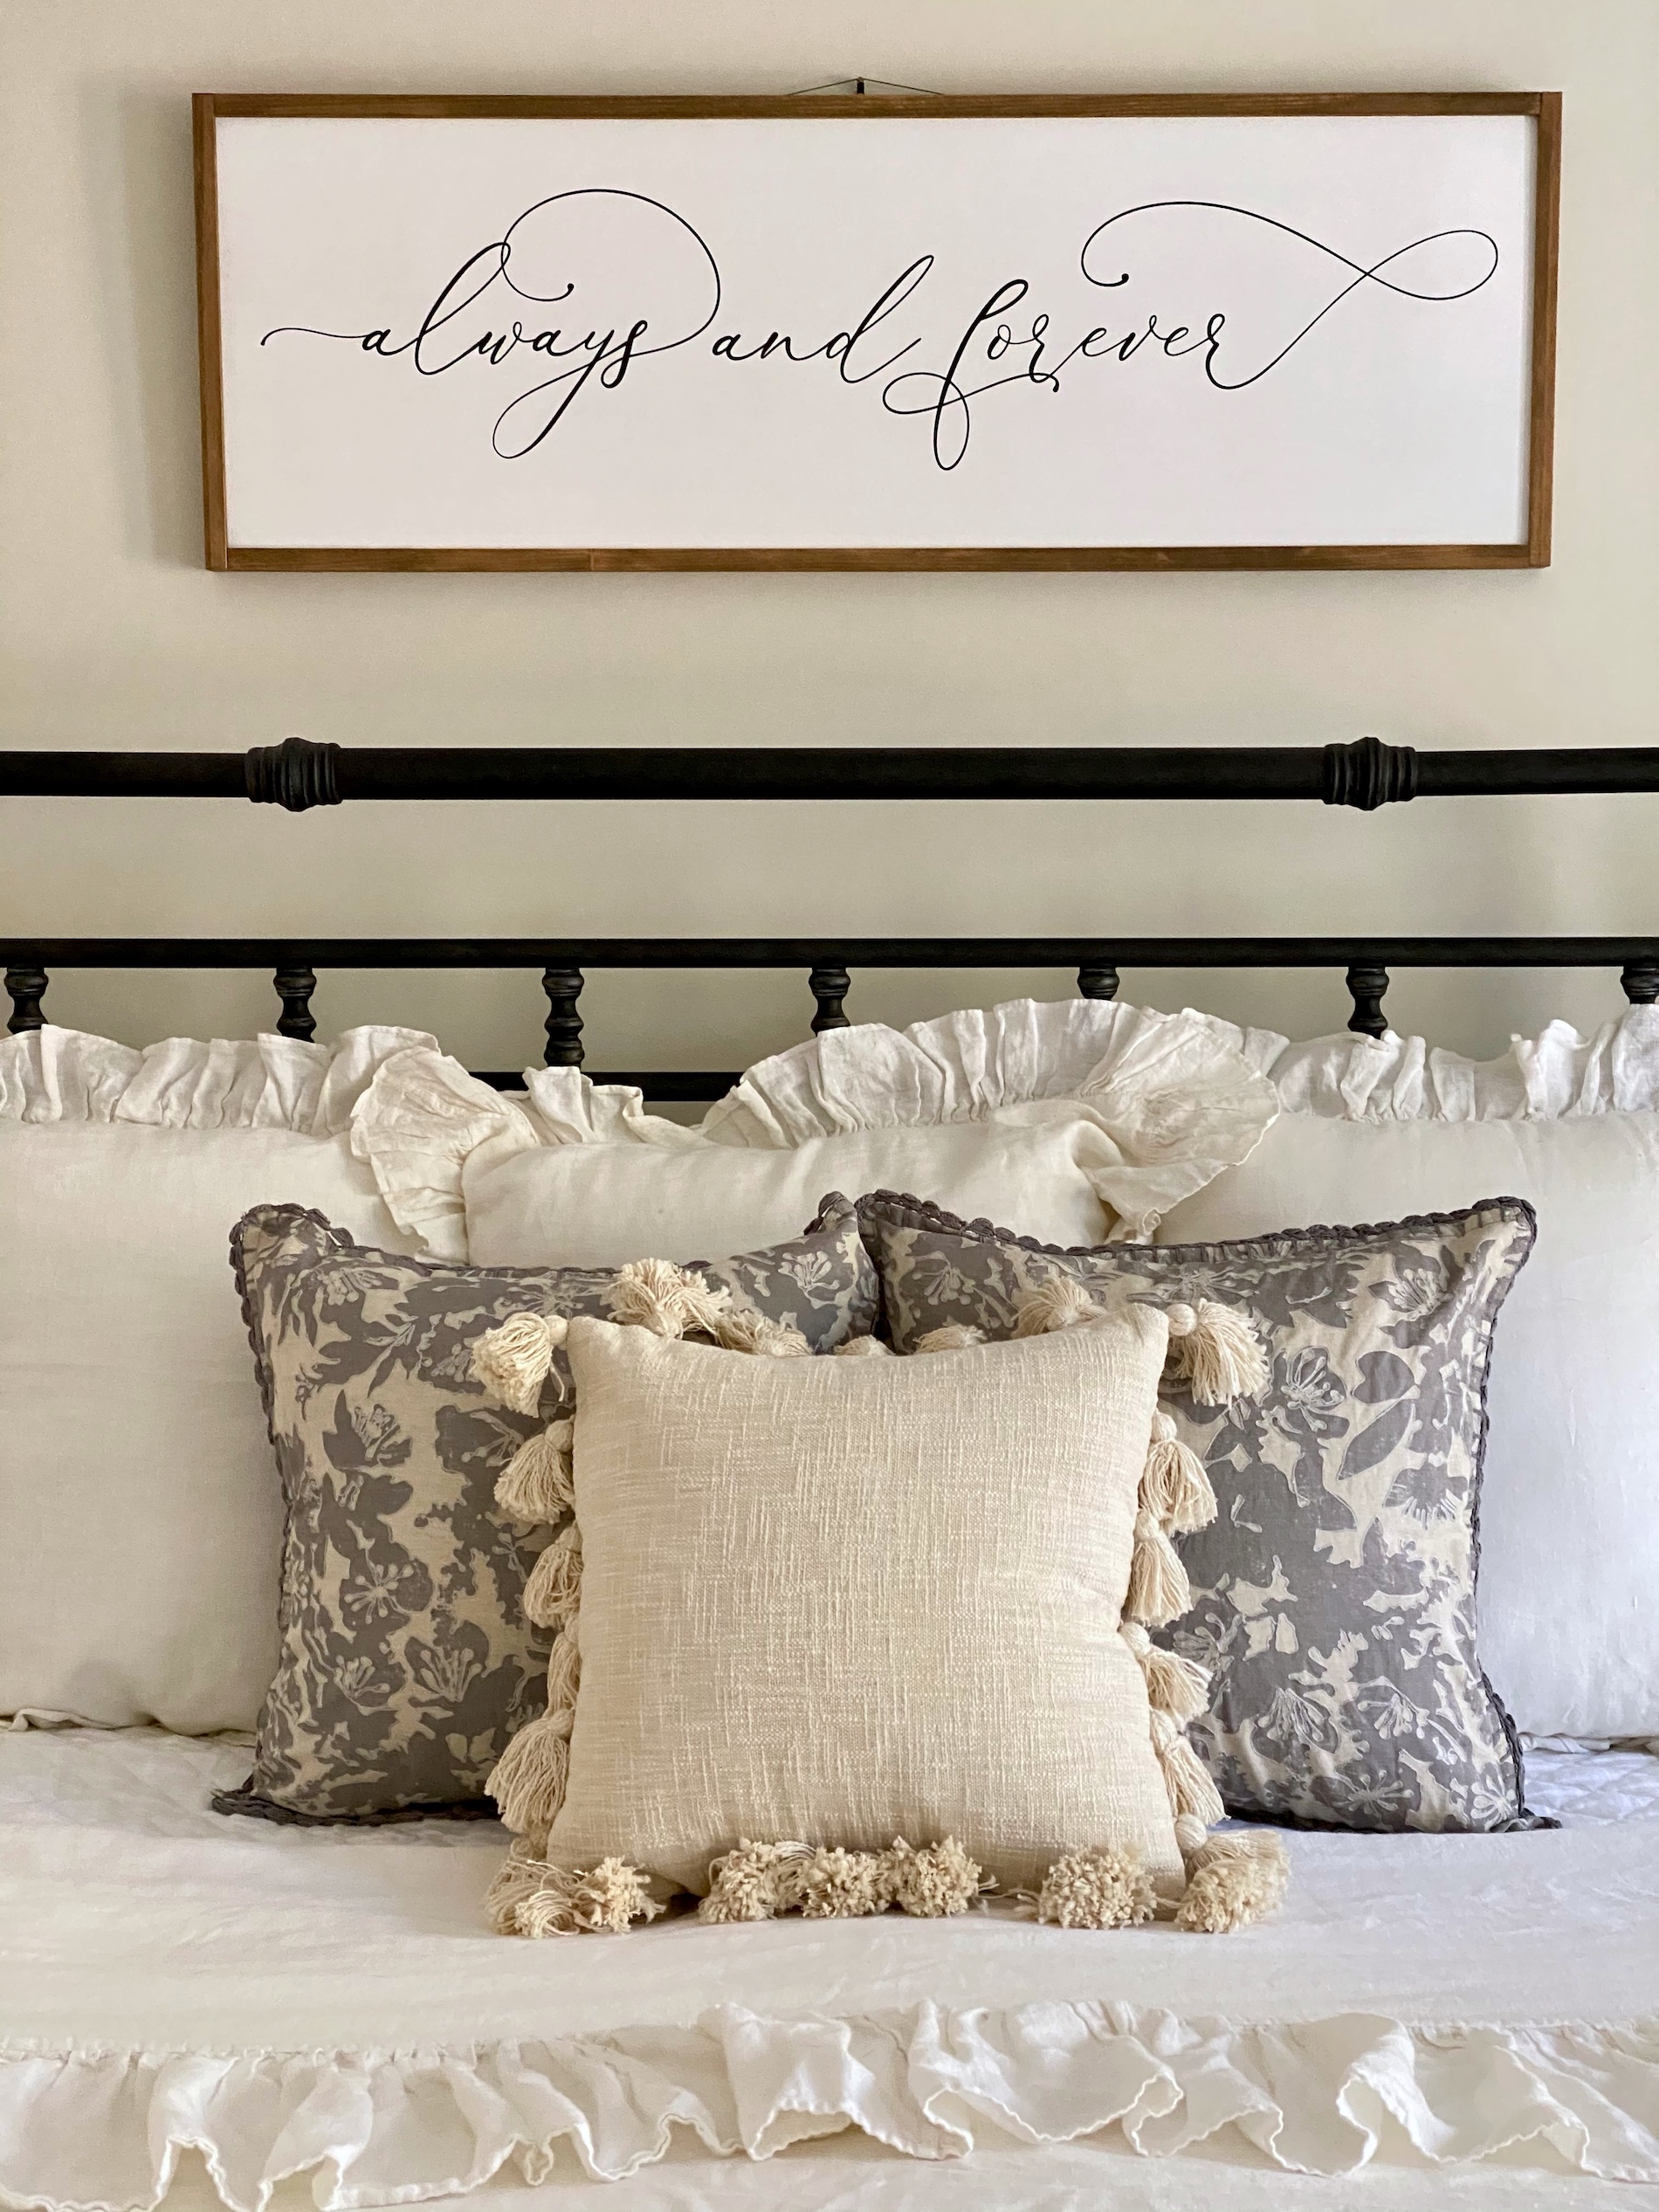 Beautiful throw pillows on the bed from Wayfair.